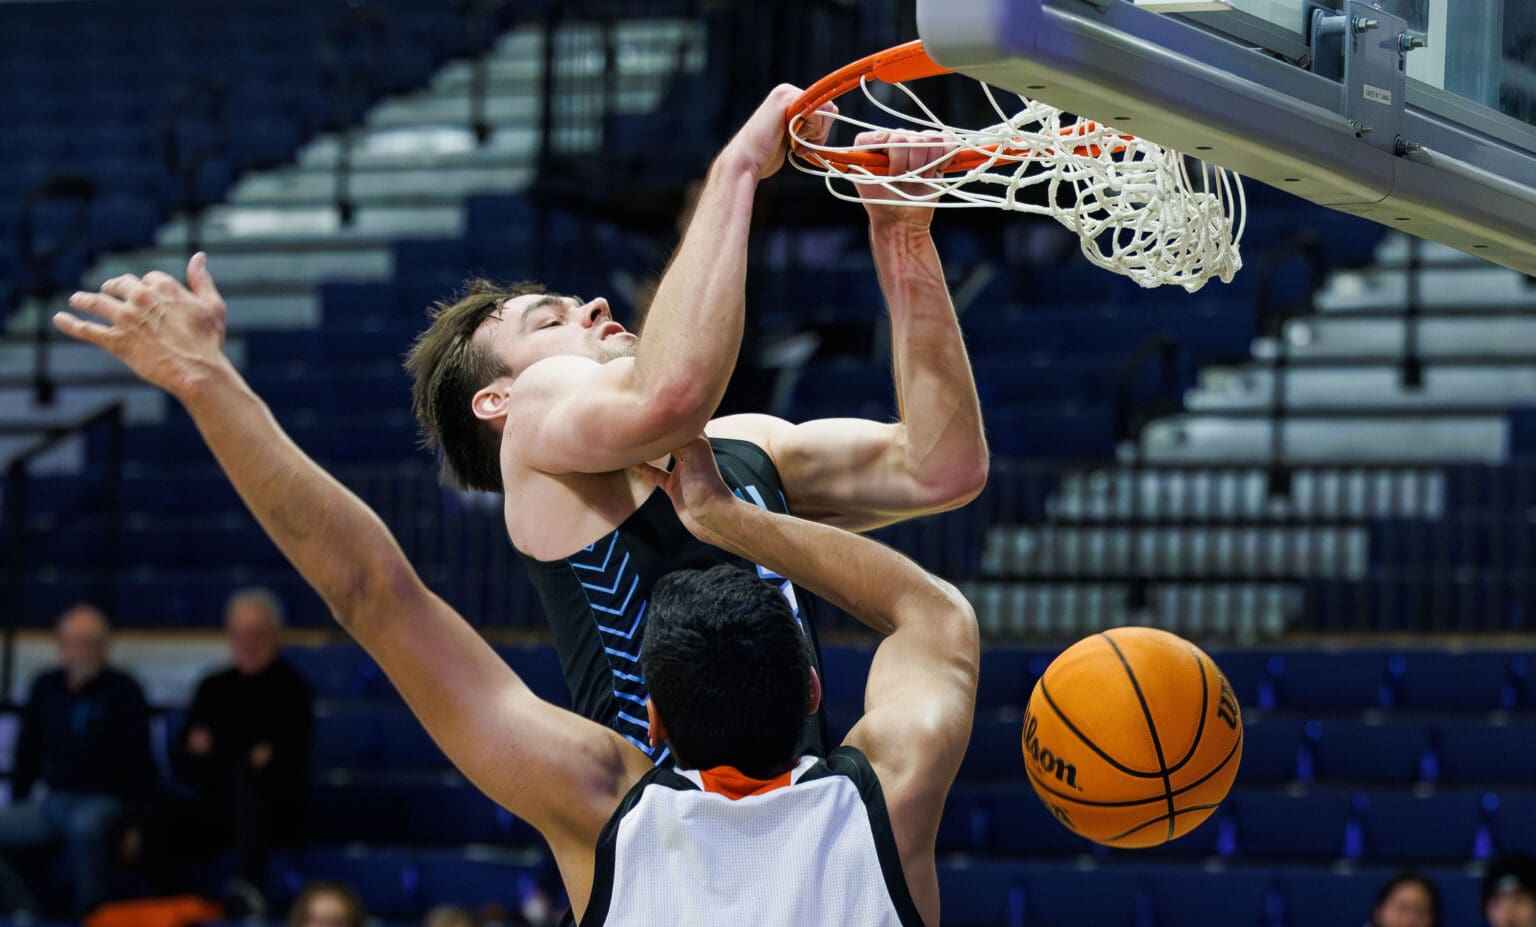 Western Washington University's Liam Clark slam dunks the ball as a defender is left below as he tries to block.